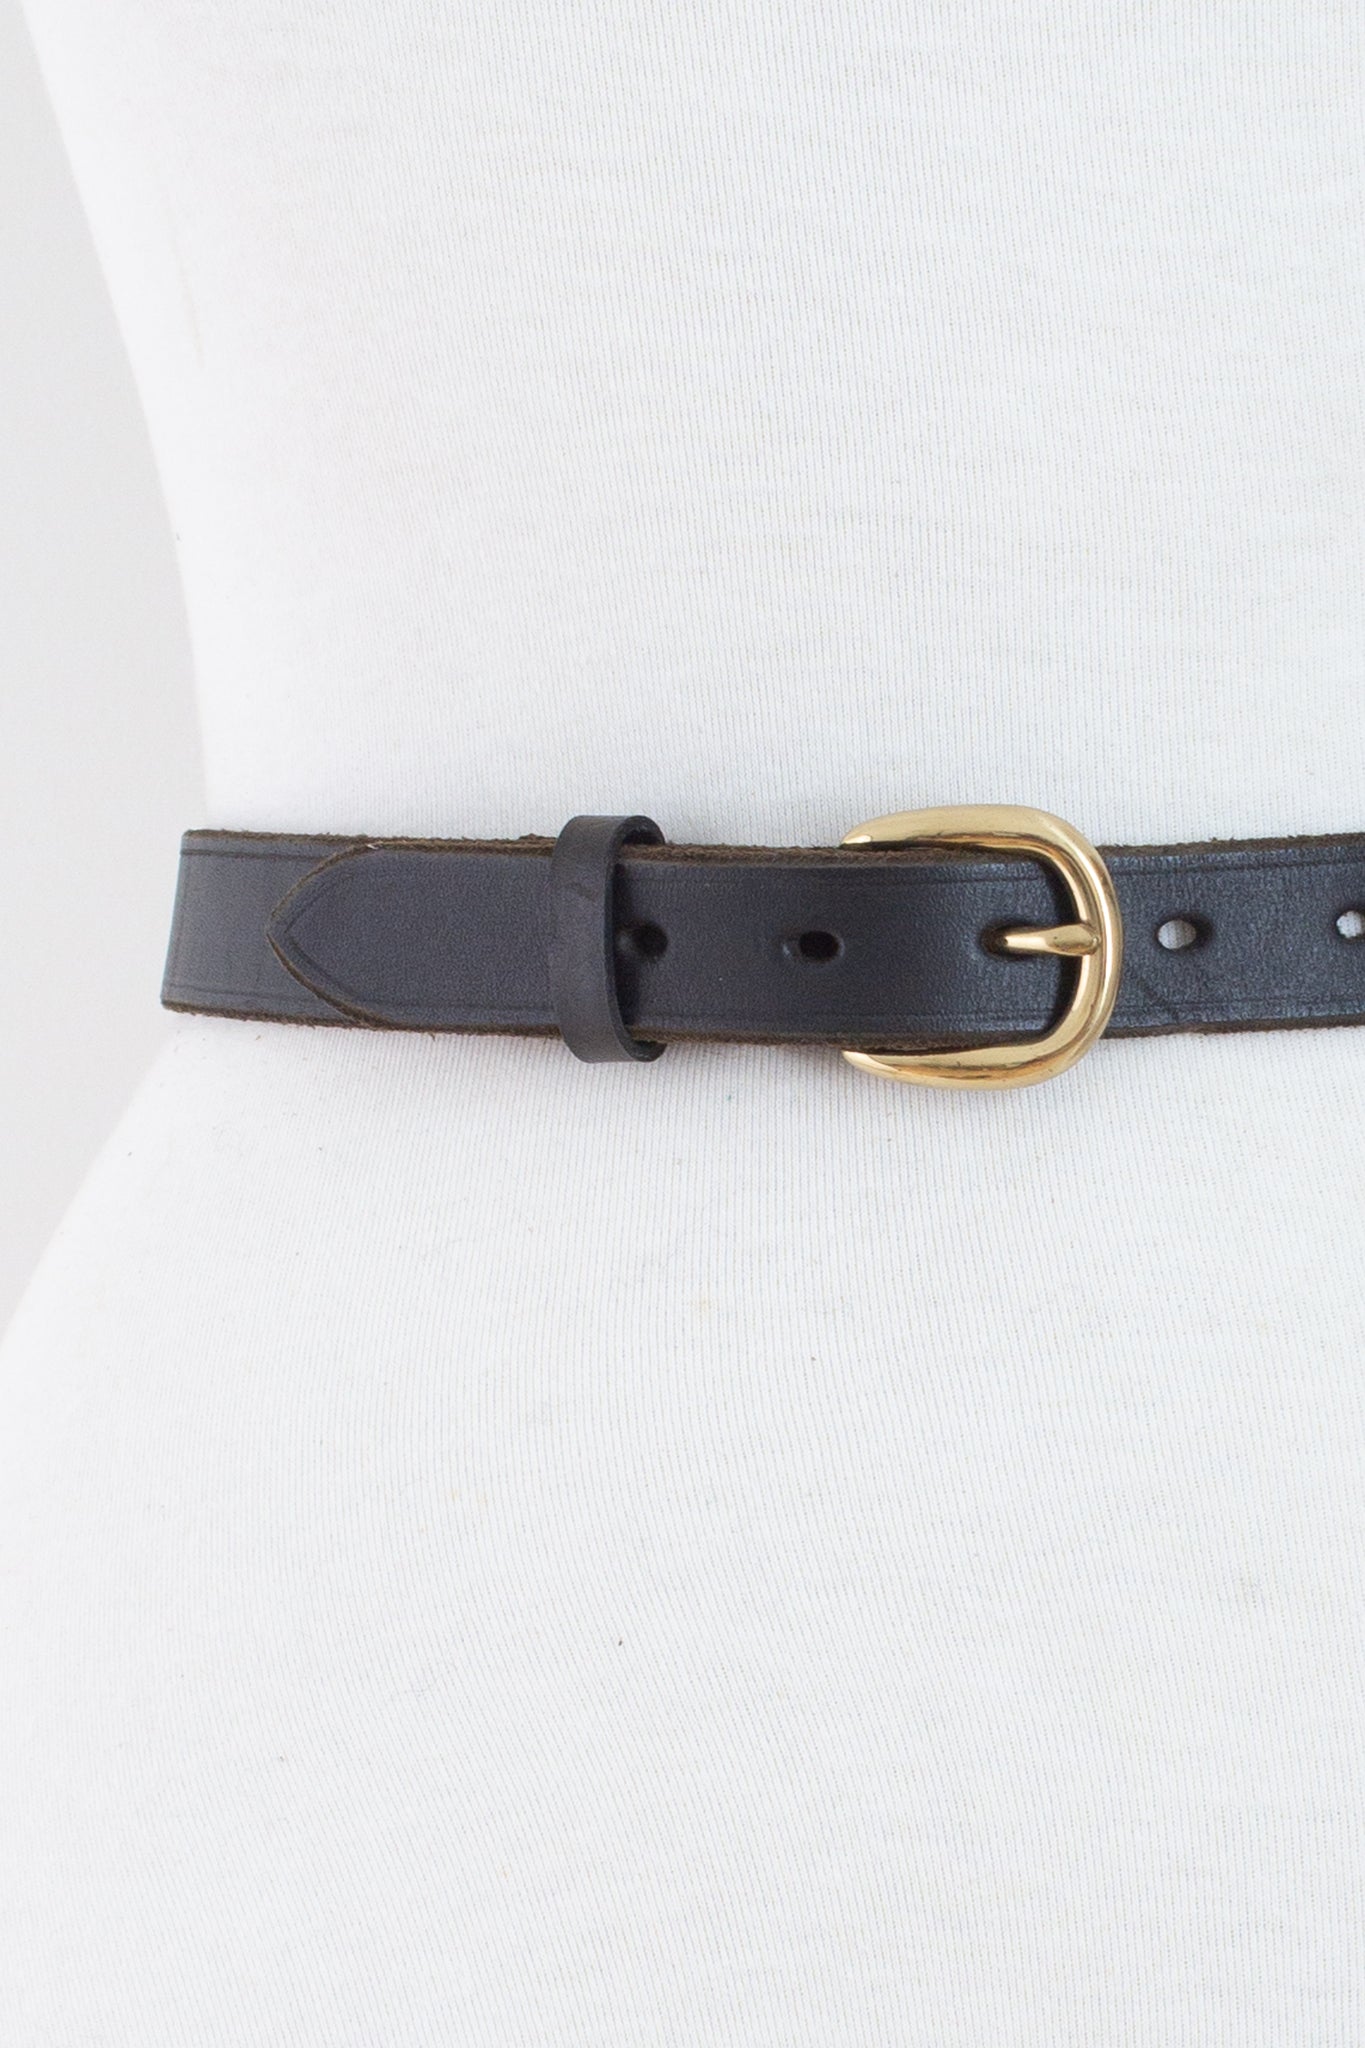 Black Leather Belt with Brass Buckle - Size 24"-29" / XS-M